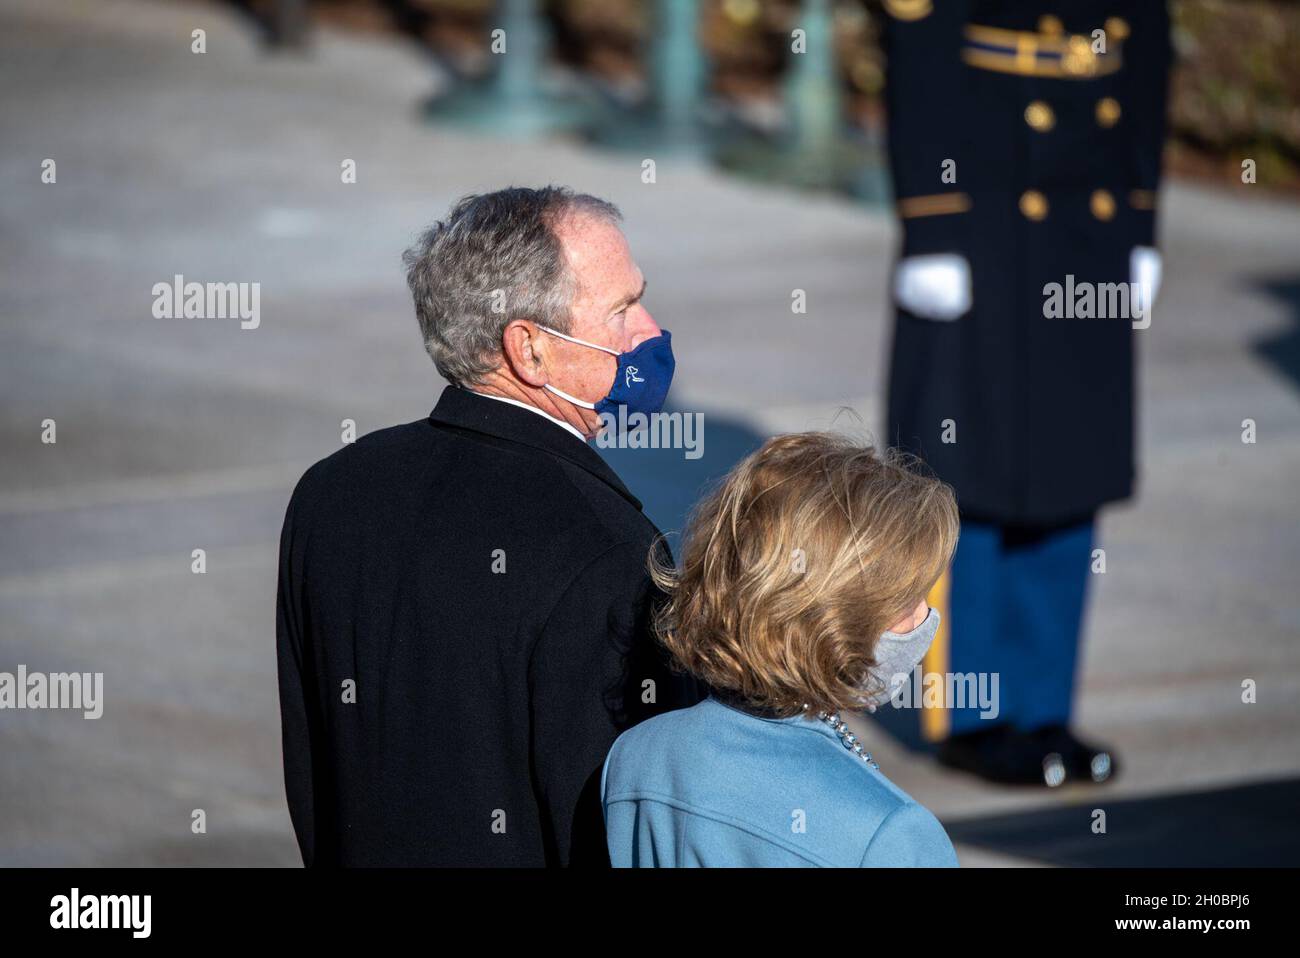 Former president George W. Bush stands with his wife, Laura Bush, prior to a Presidential Armed Forces Wreath Ceremony at the Tomb of the Unknown Soldier in Arlington National Cemetery, Arlington, Virginia, Jan. 20, 2021. During the ceremony, President Joseph R. Biden Jr. and Vice President Kamala Harris honored the fallen with a wreath-laying following the 59th Presidential Inauguration. Stock Photo